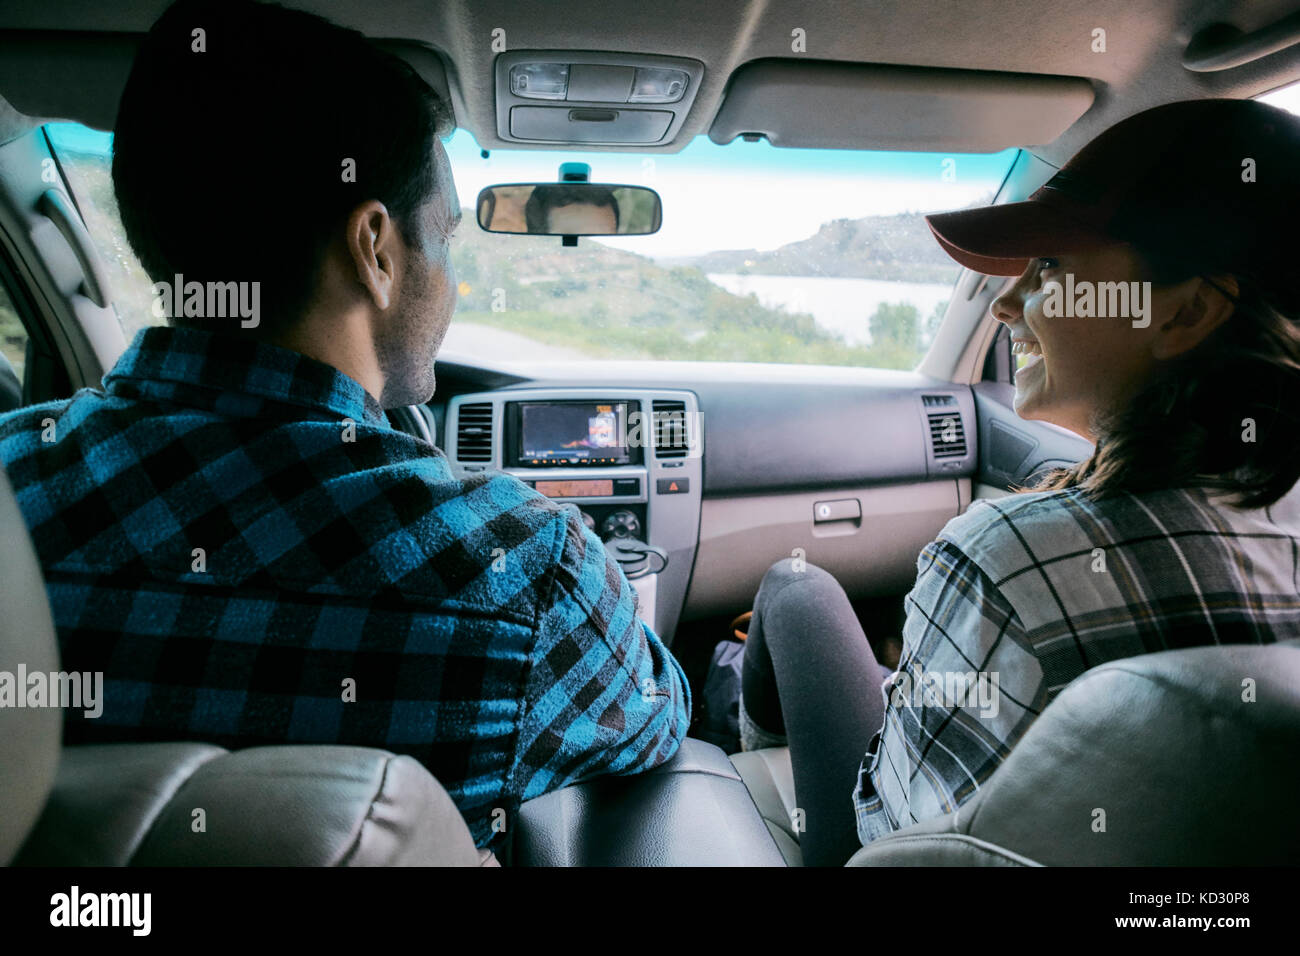 Couple in car, laughing, rear view Stock Photo